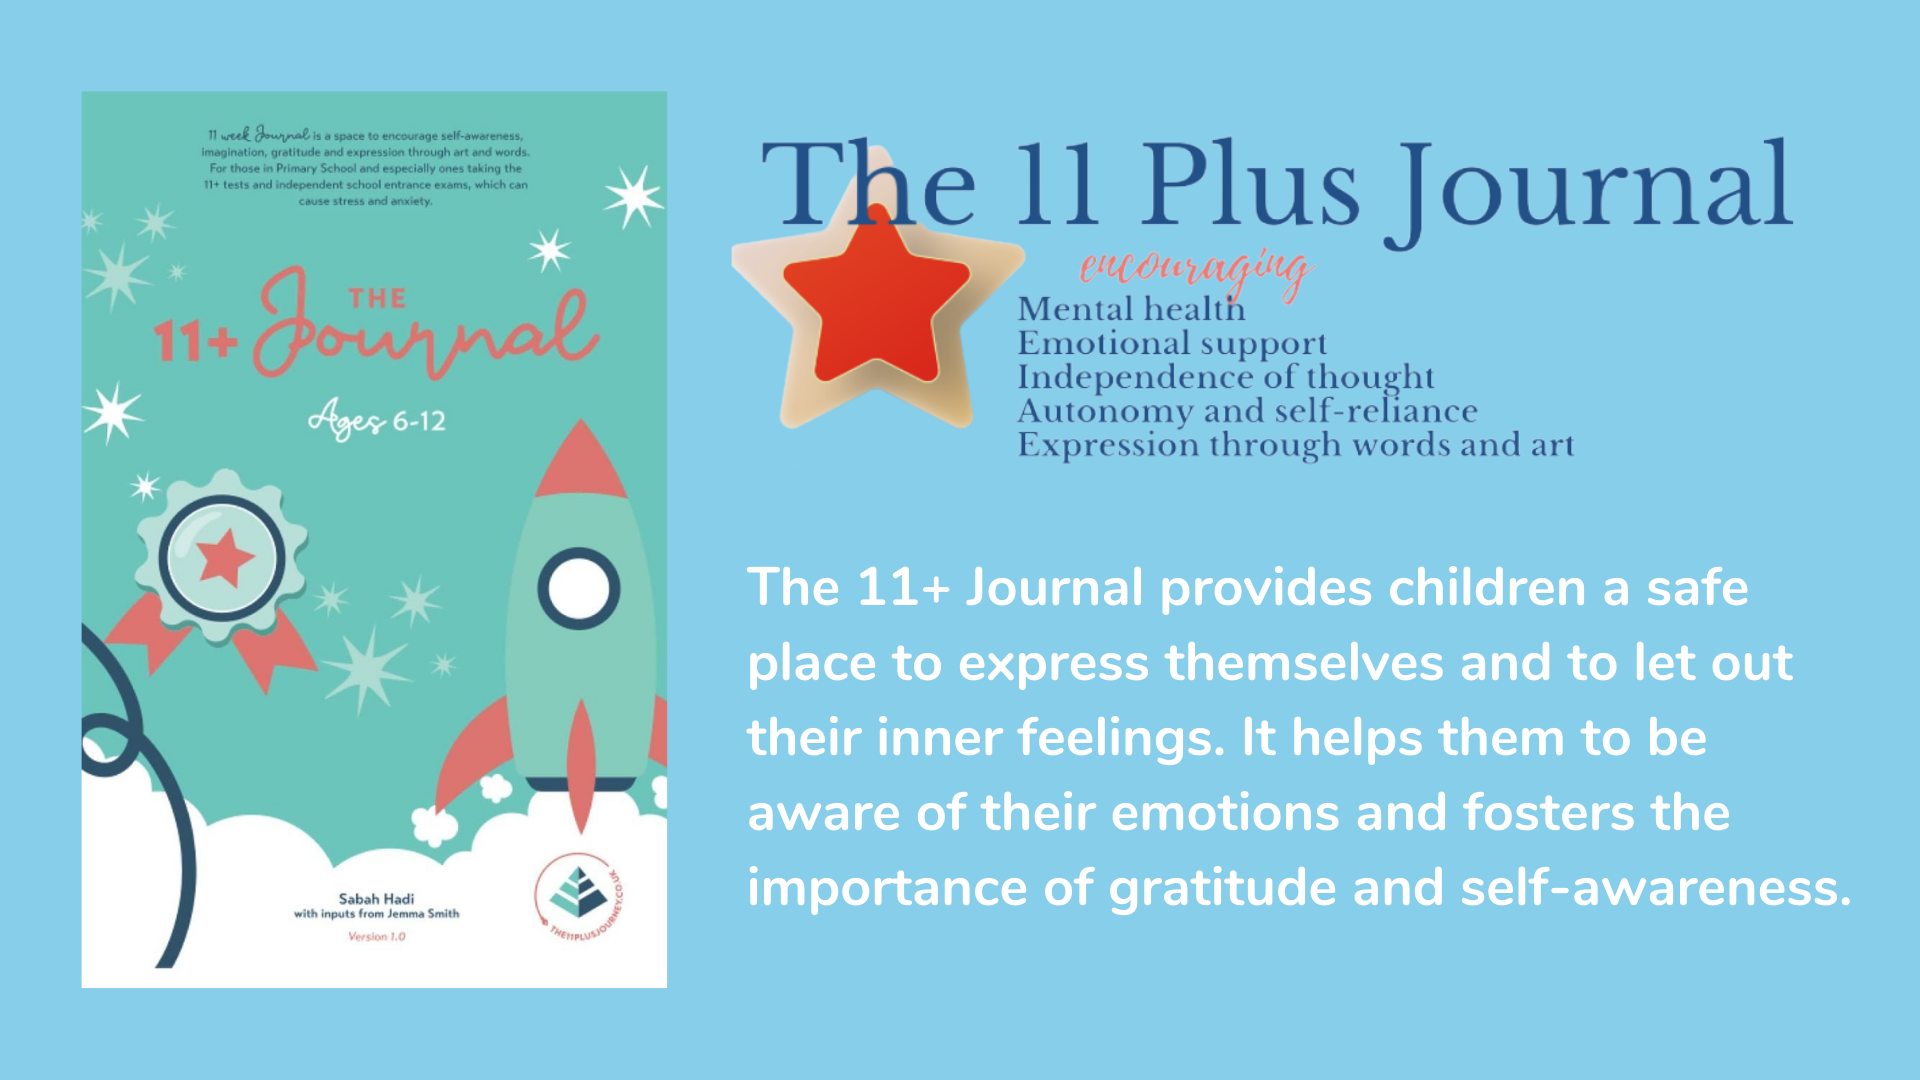 The 11+ Journal, book cover and description.